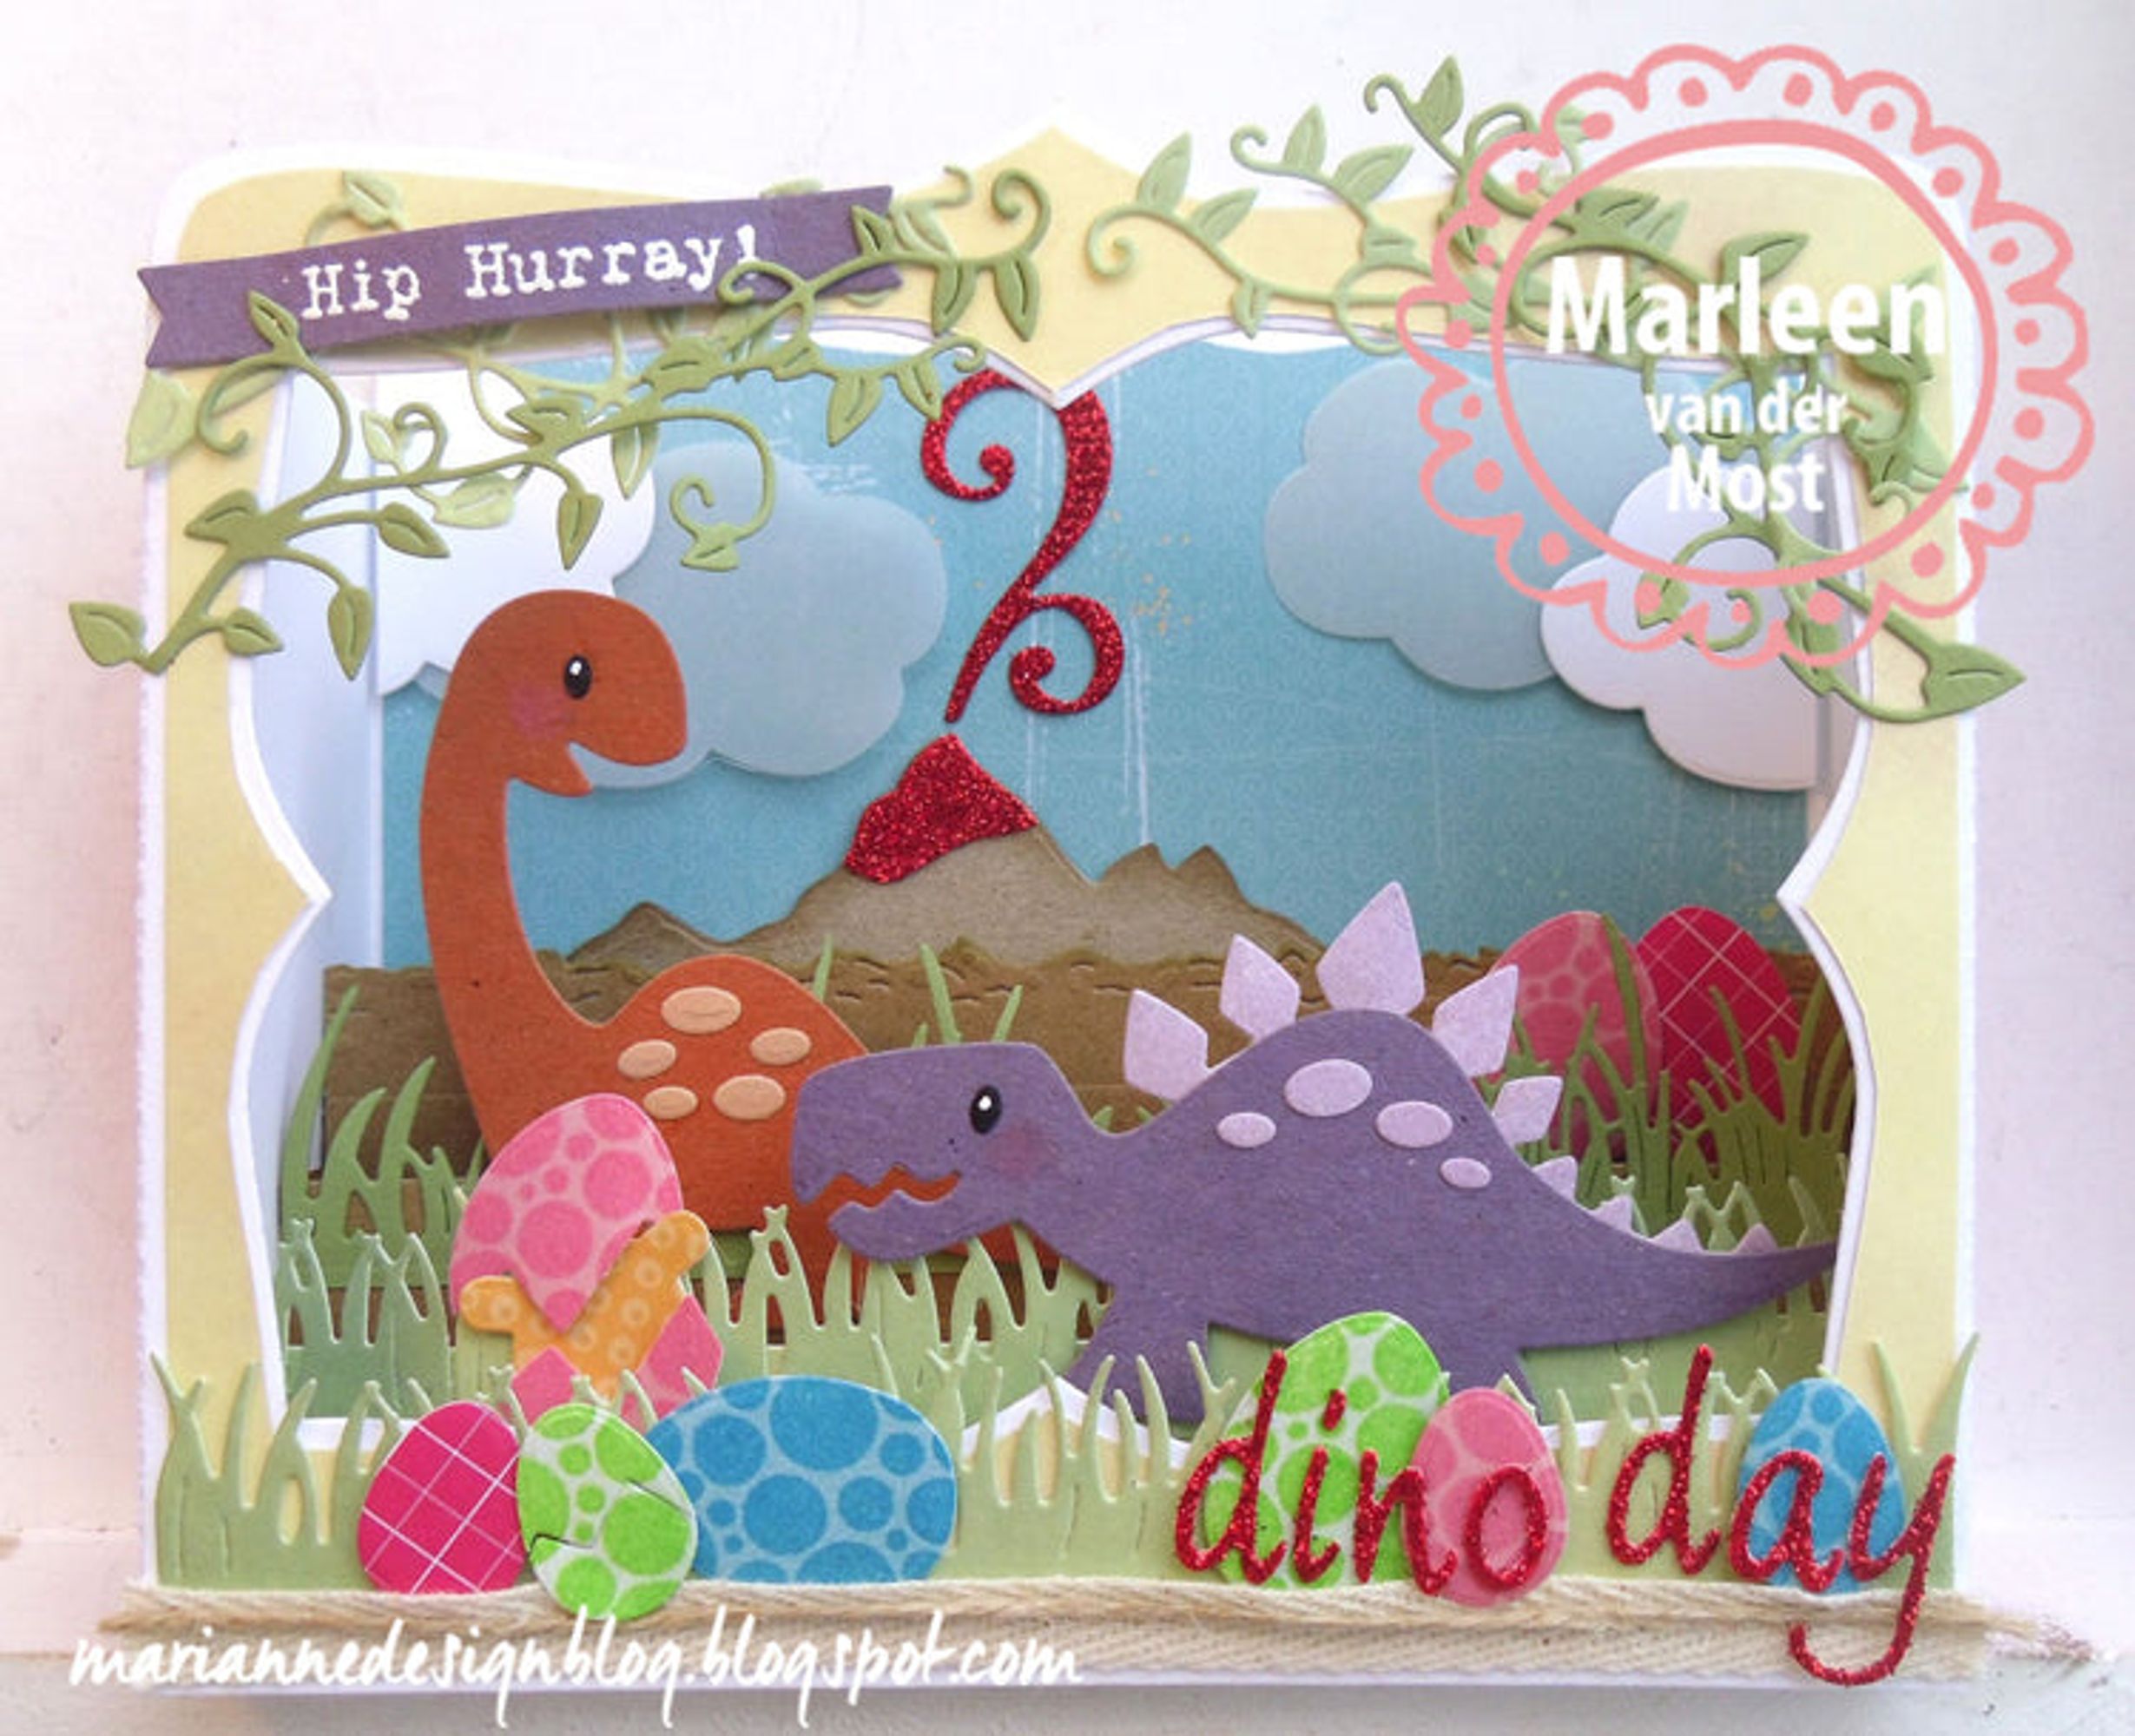 Marianne Design: Collectables - Easter Eggs/Balloons